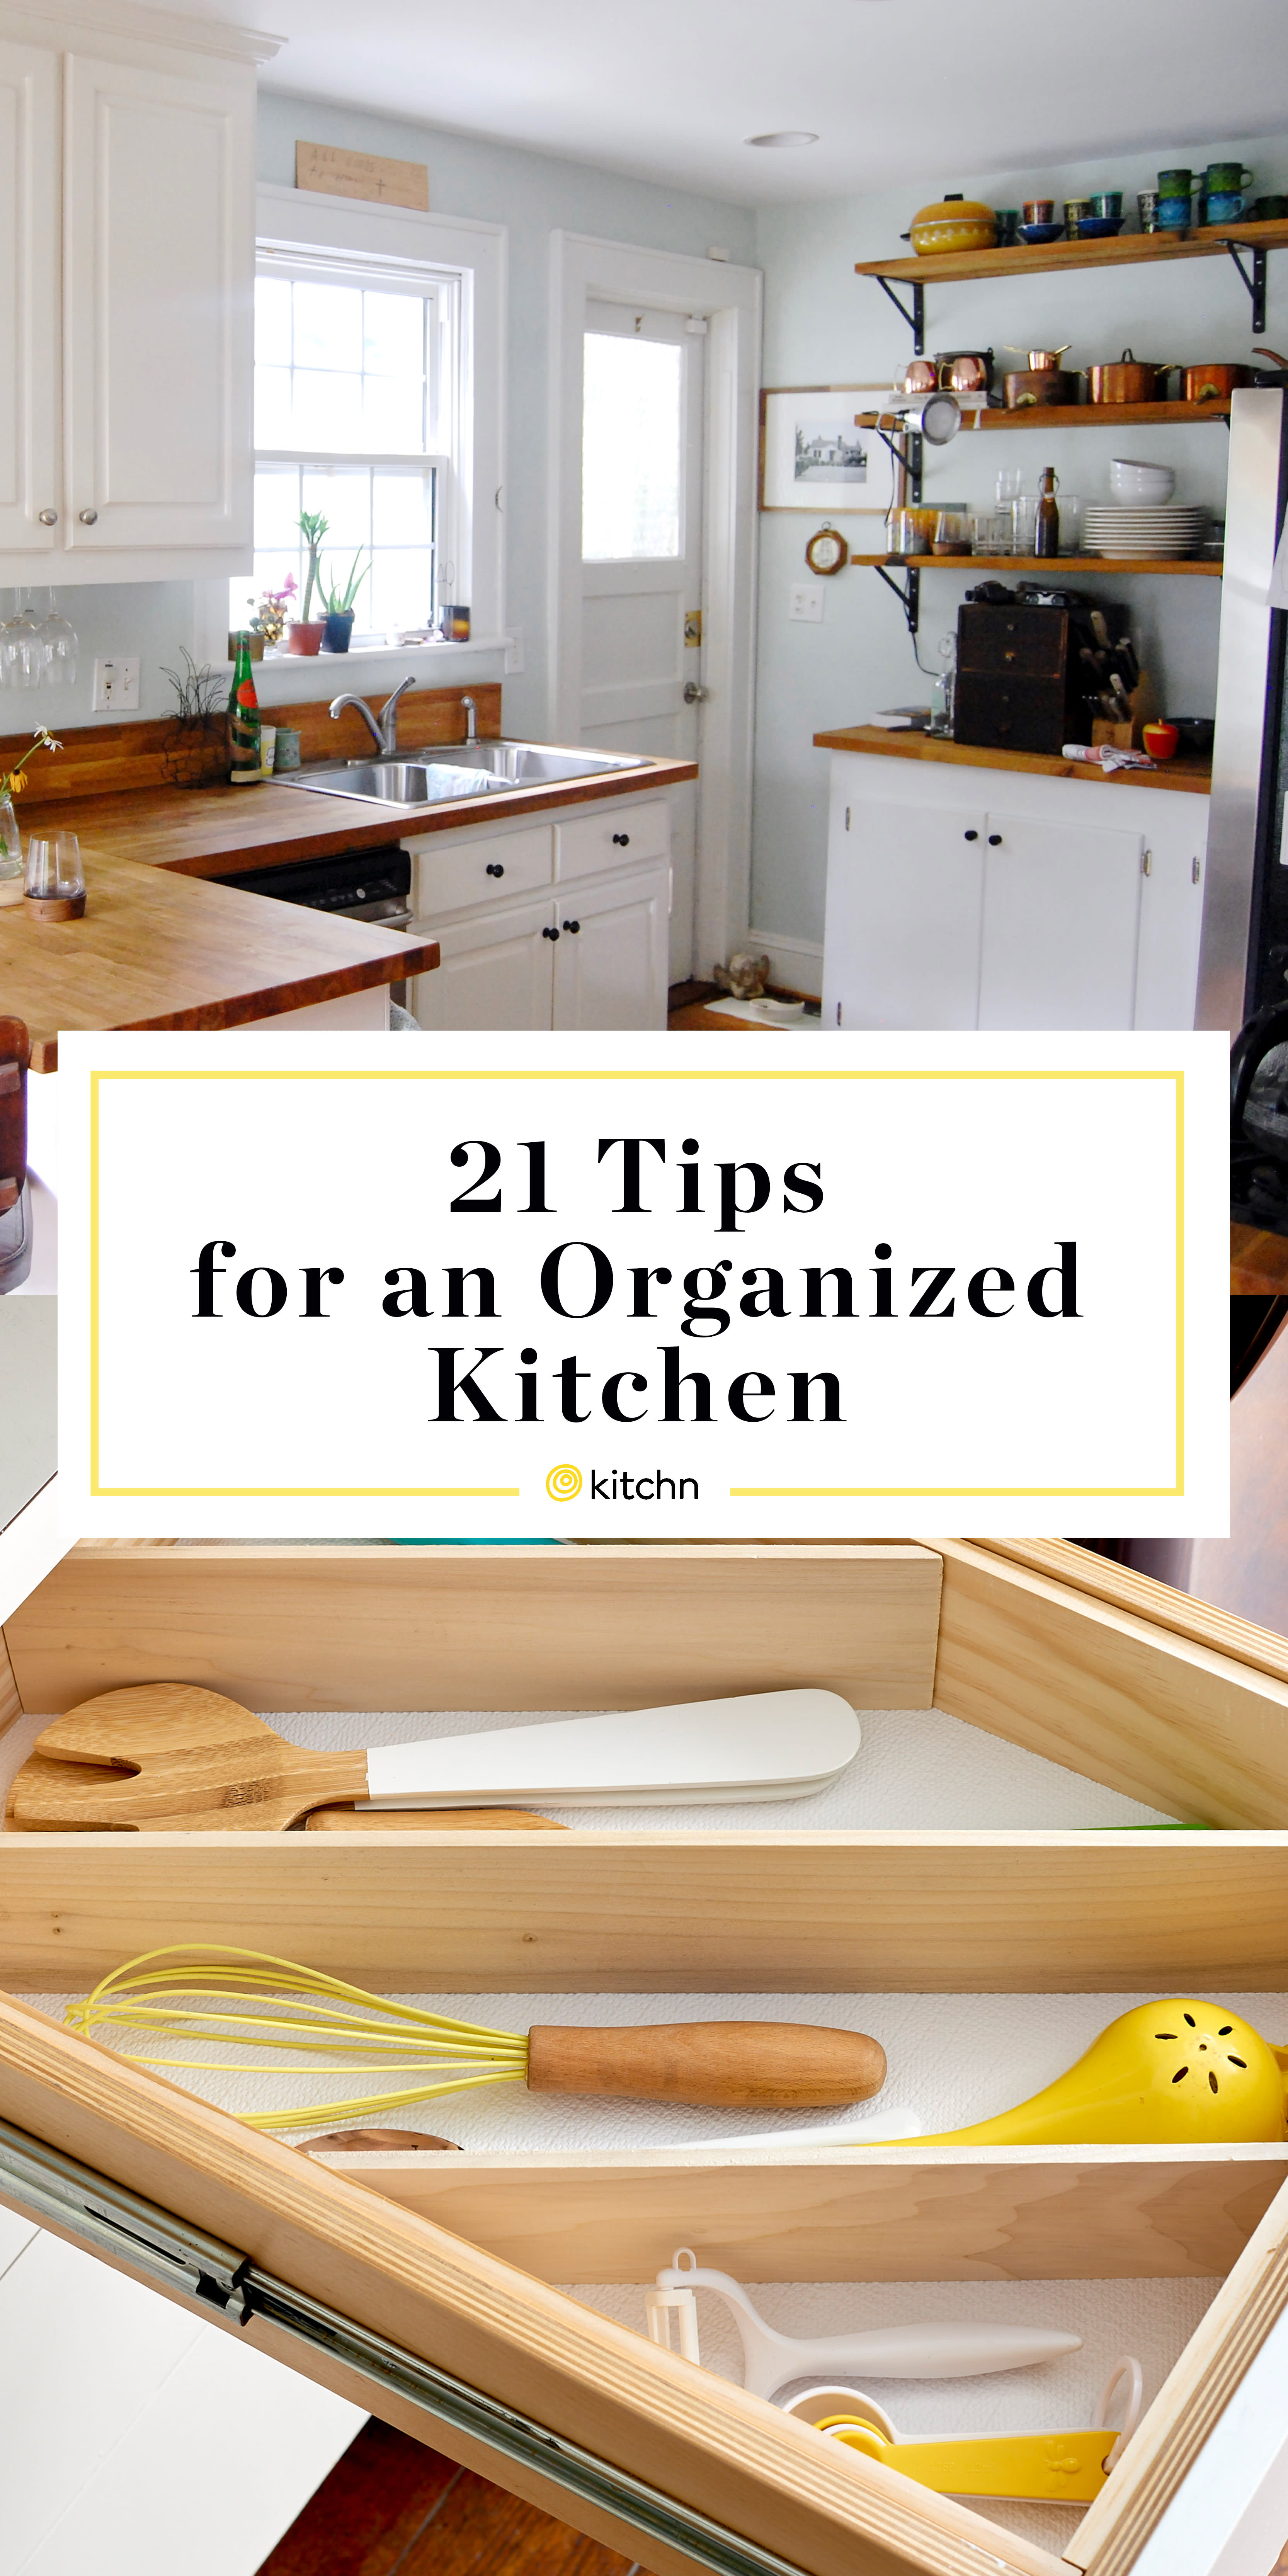 18 Little Ways to Be More Organized in 2018   Kitchn